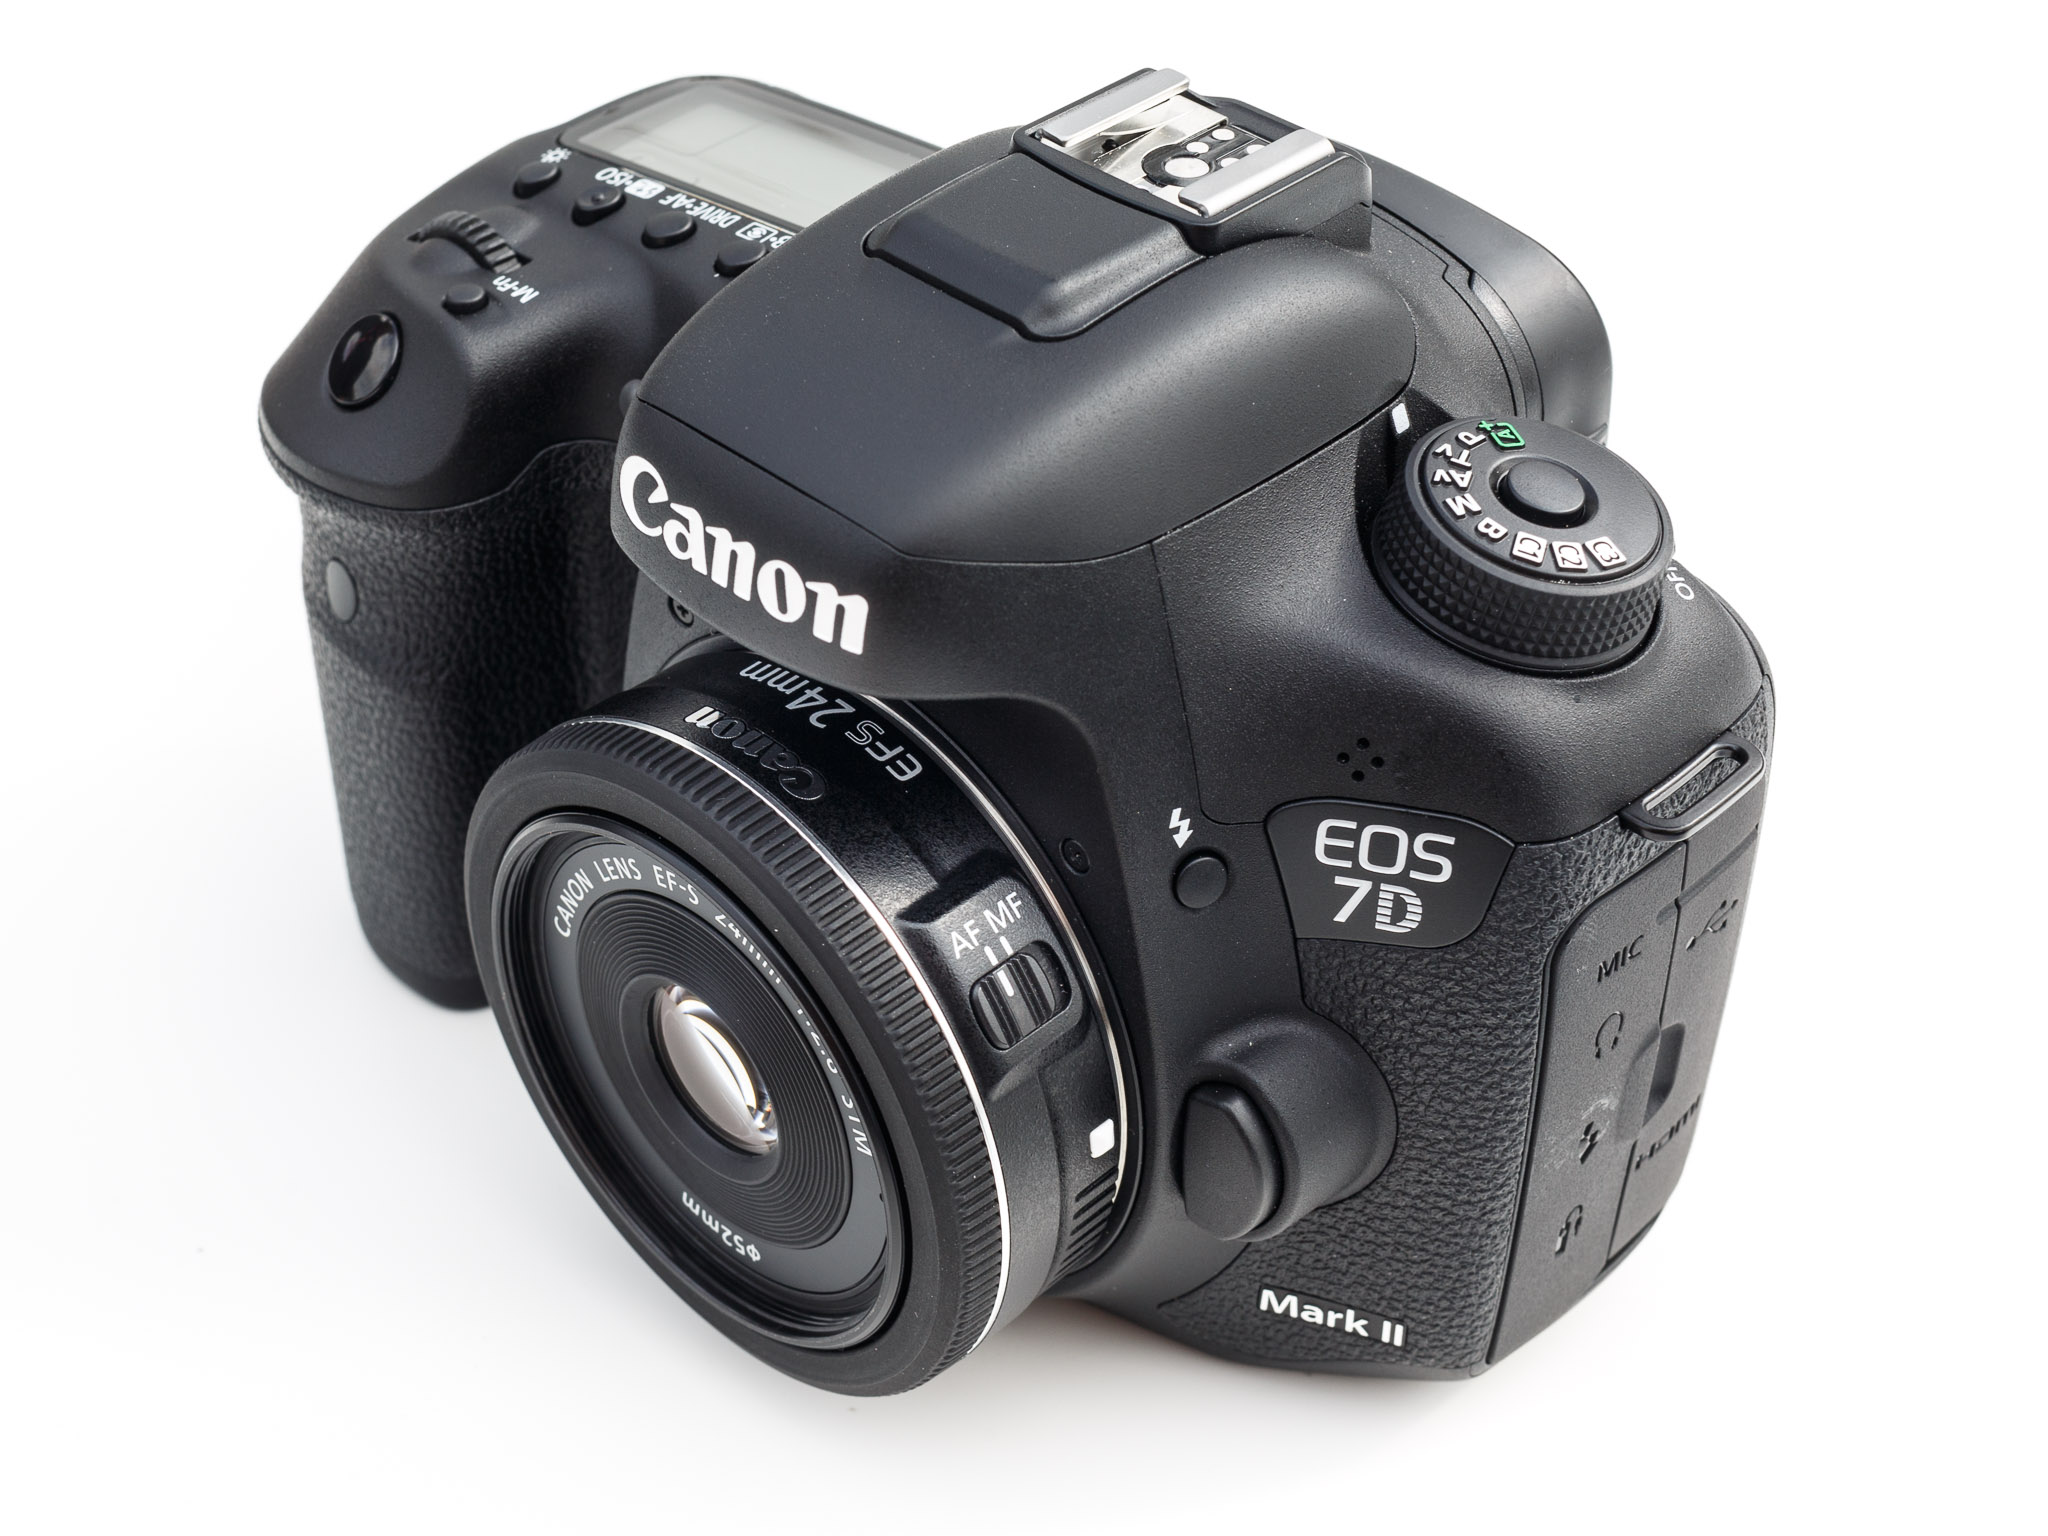 Canon's 7D Mark II debuted at Photokina along with this compact 28mm f2.8 pancake lens.